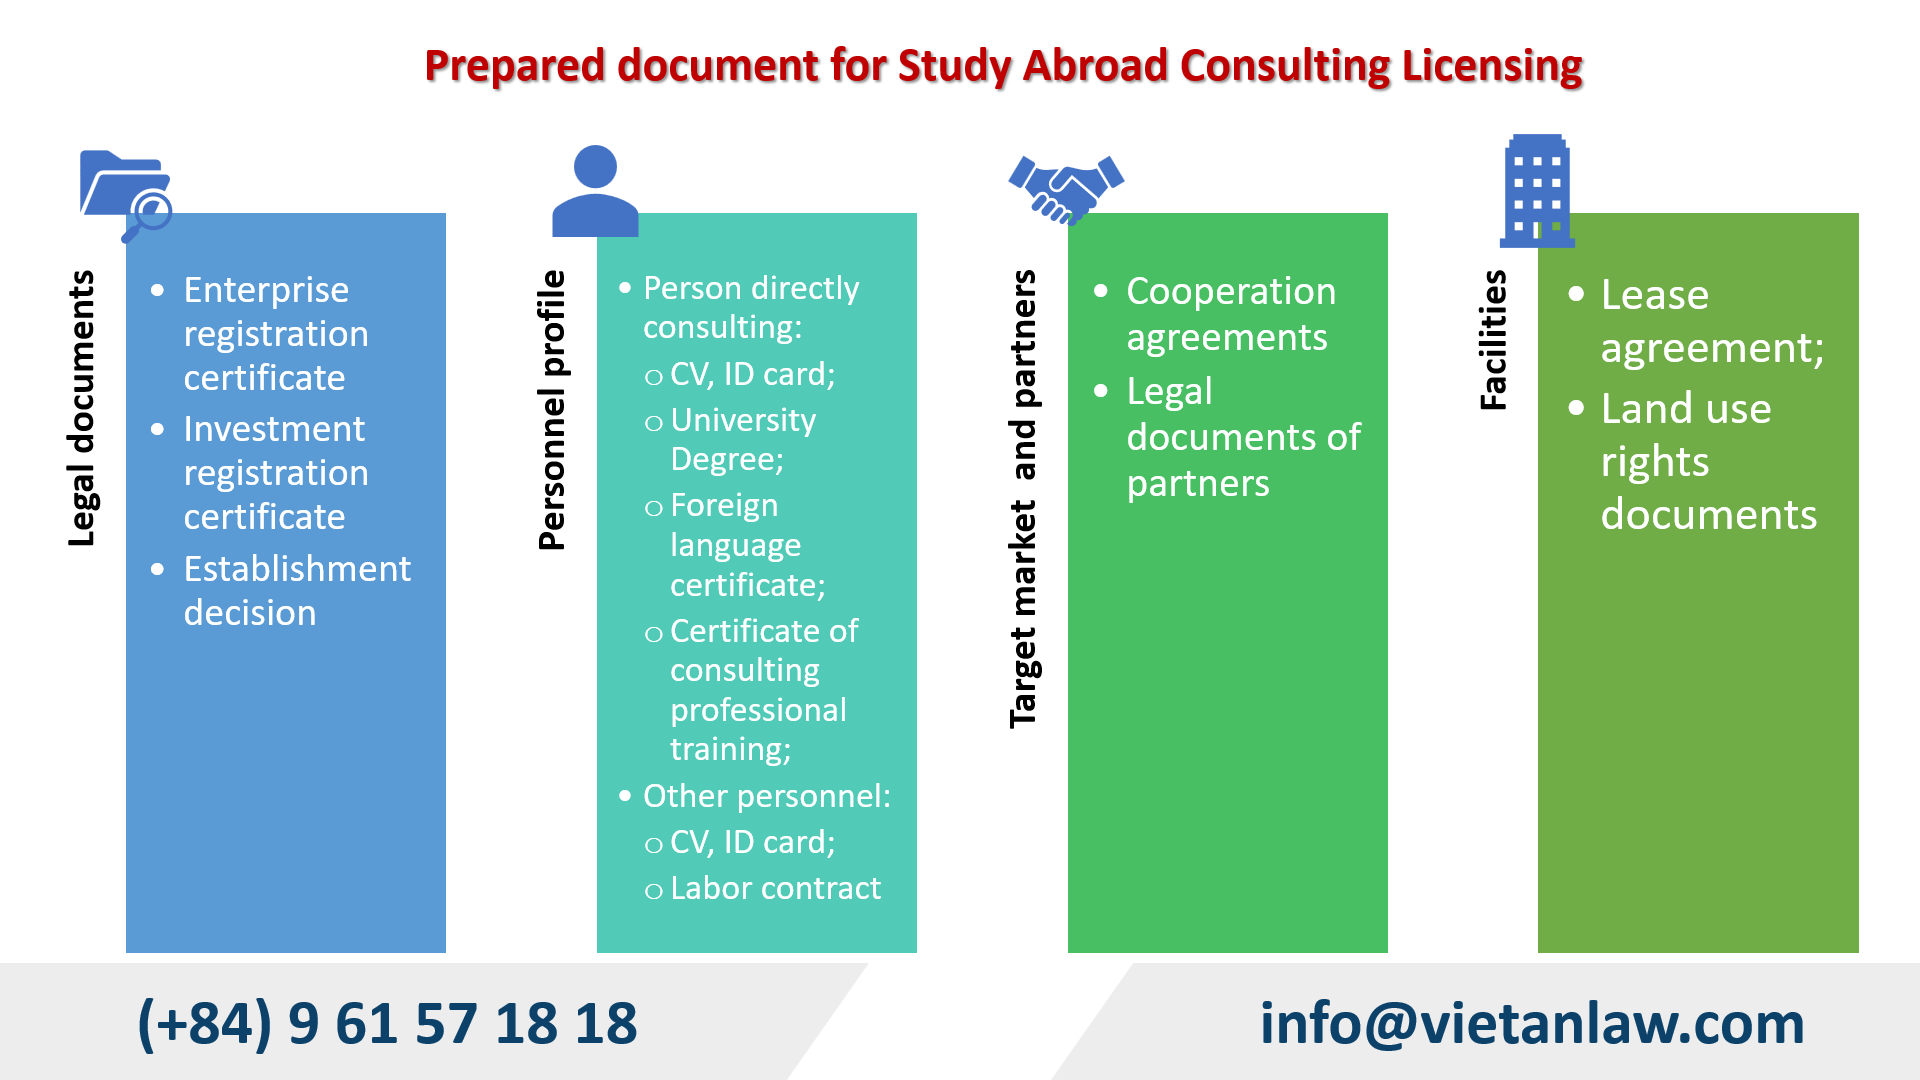 Dossier for for a study abroad consulting license in Vietnam